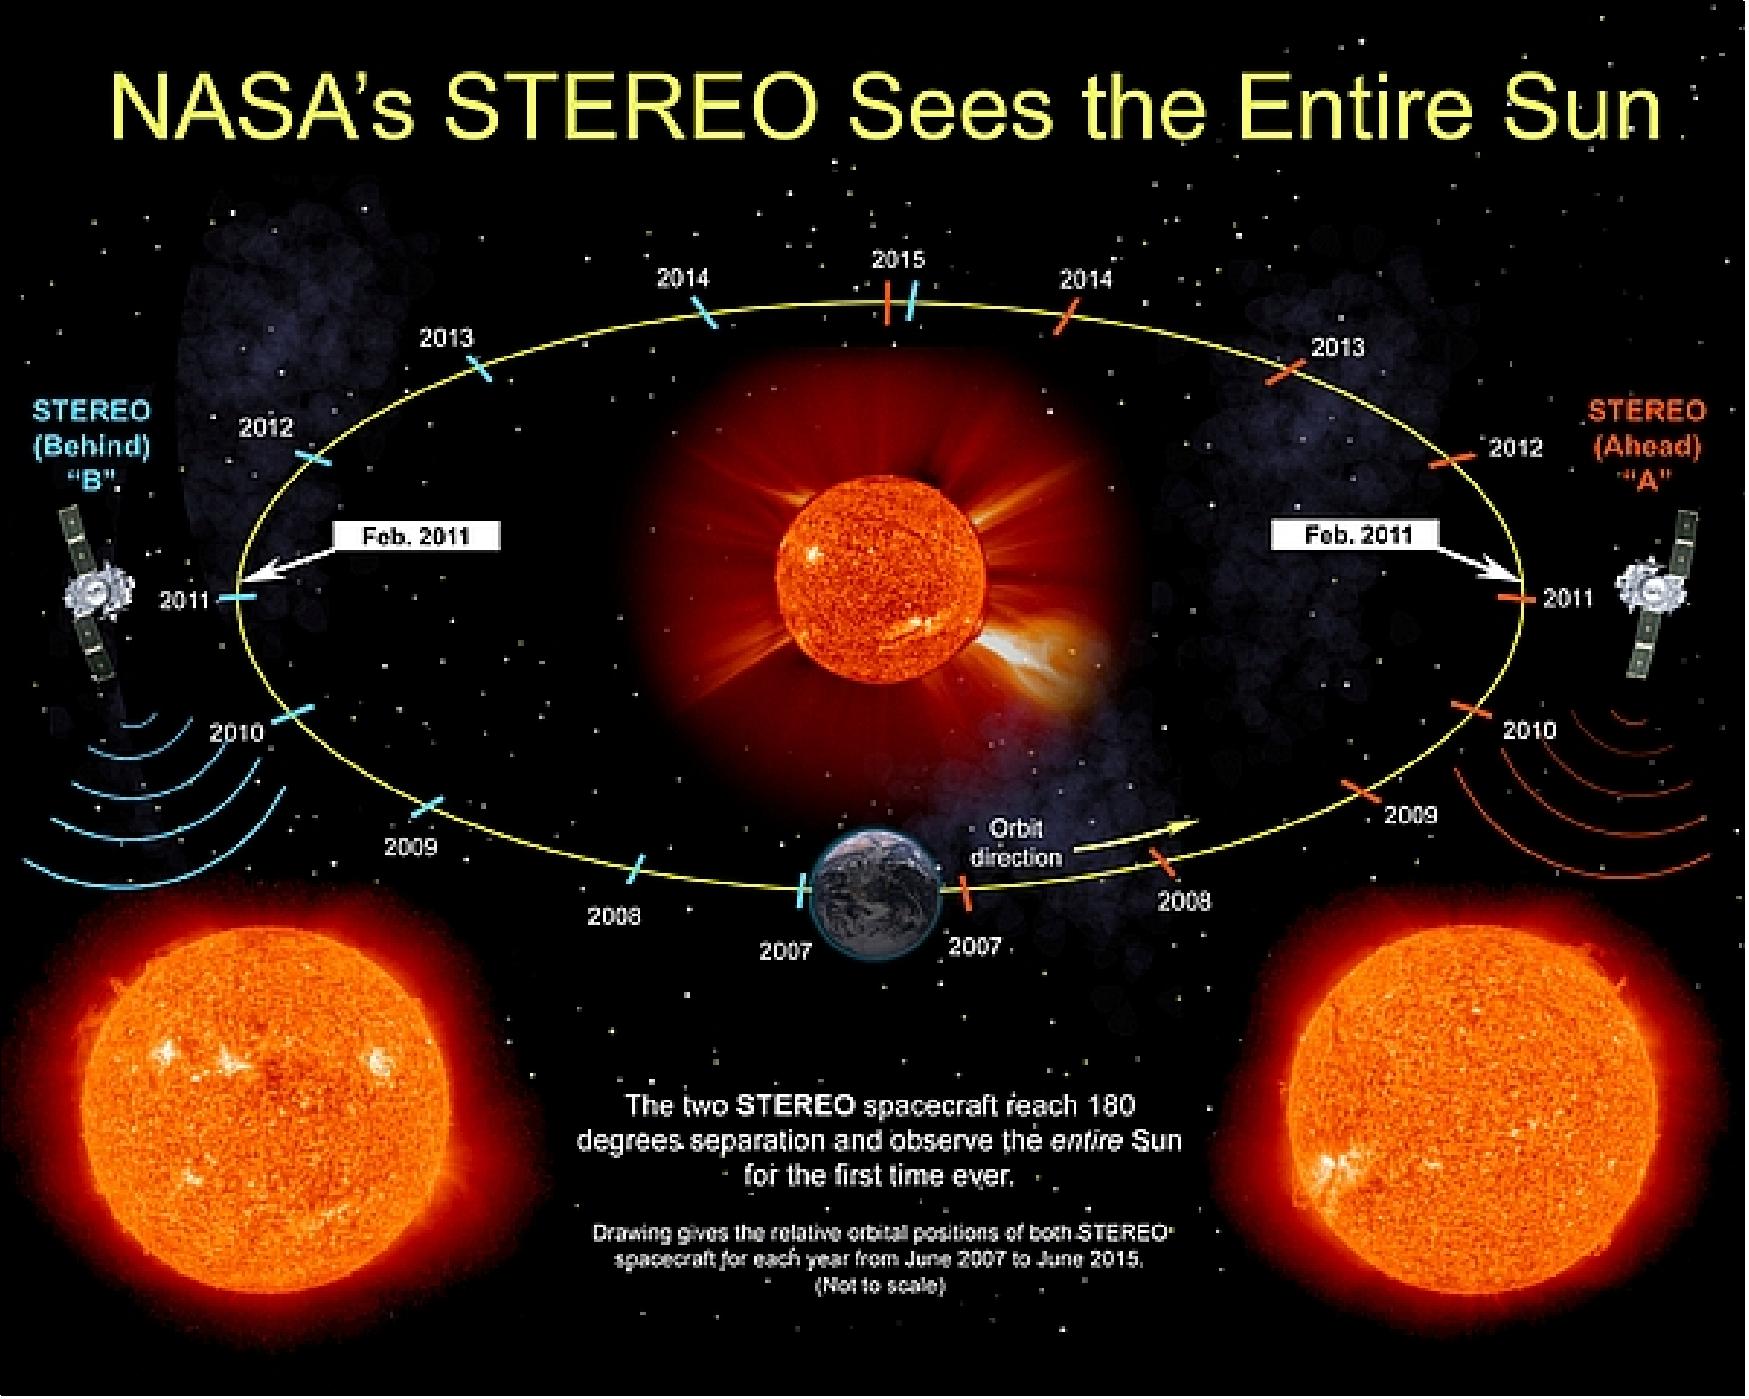 Figure 36: On Feb. 6, 2011, the two STEREO spacecraft were precisely 180º apart in their orbit permitting a full view of the Sun (image credit: NASA)